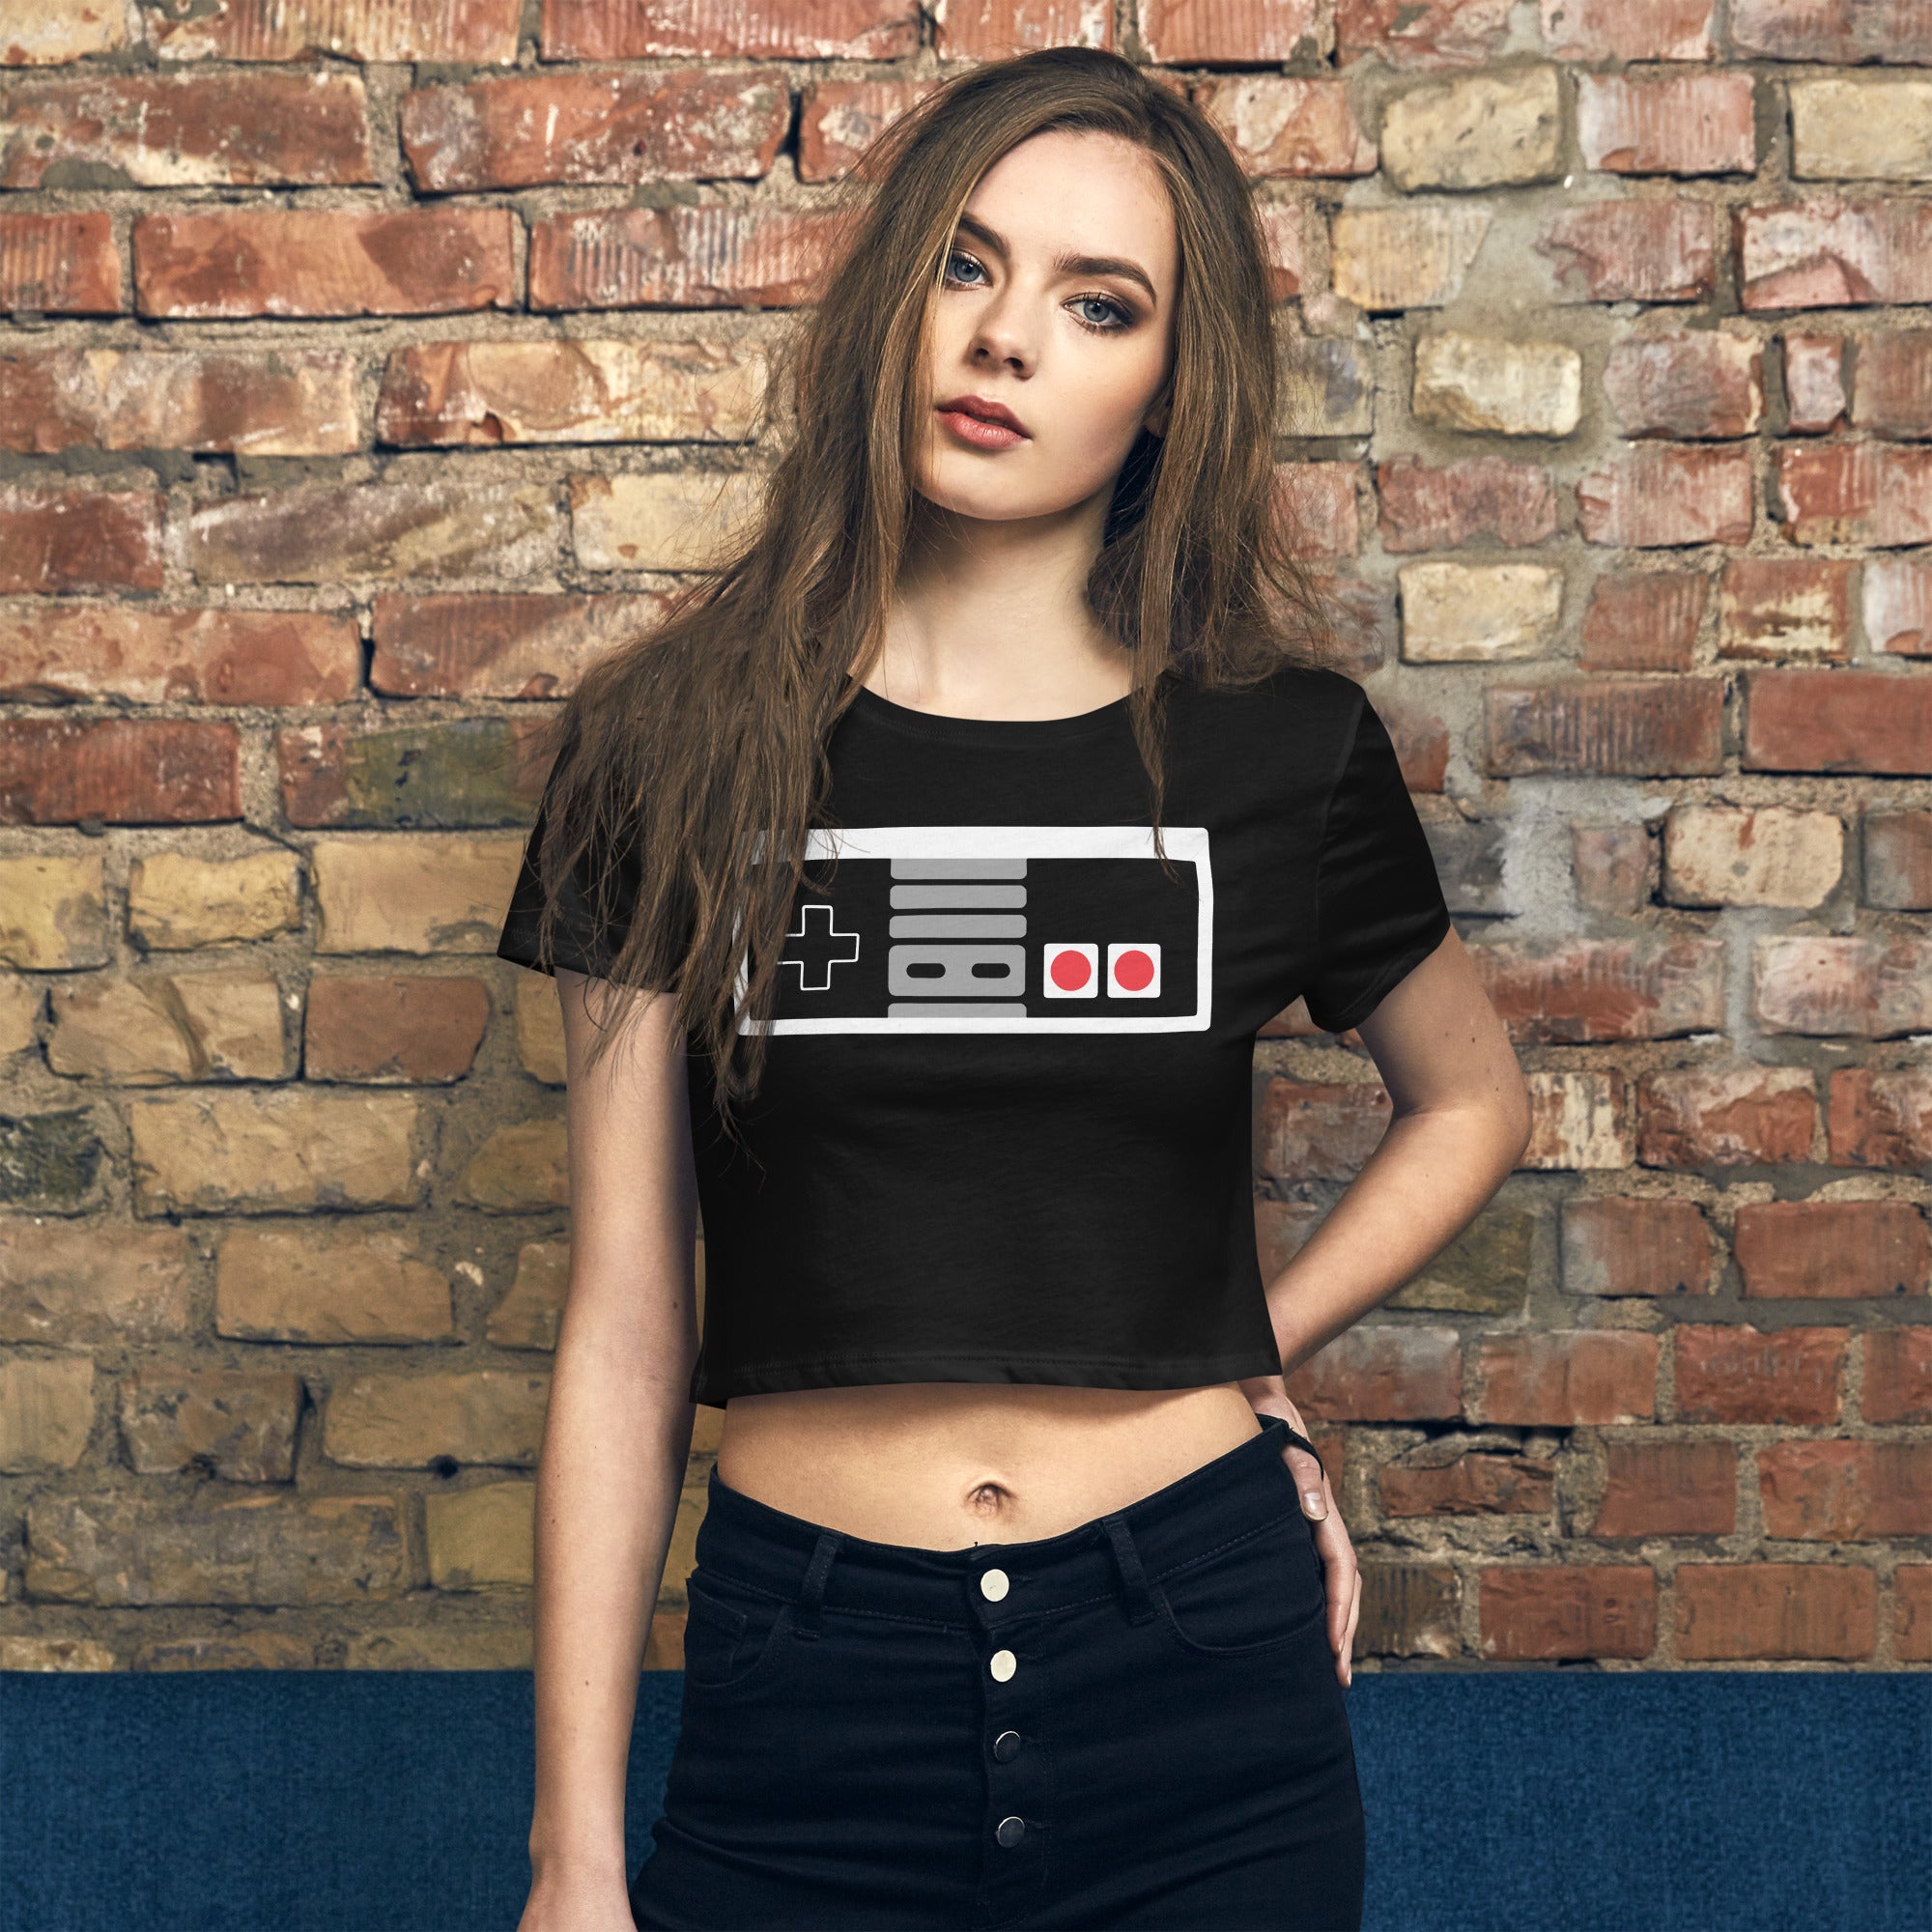 Classic 80's Style Game Controller Women’s Crop Tee